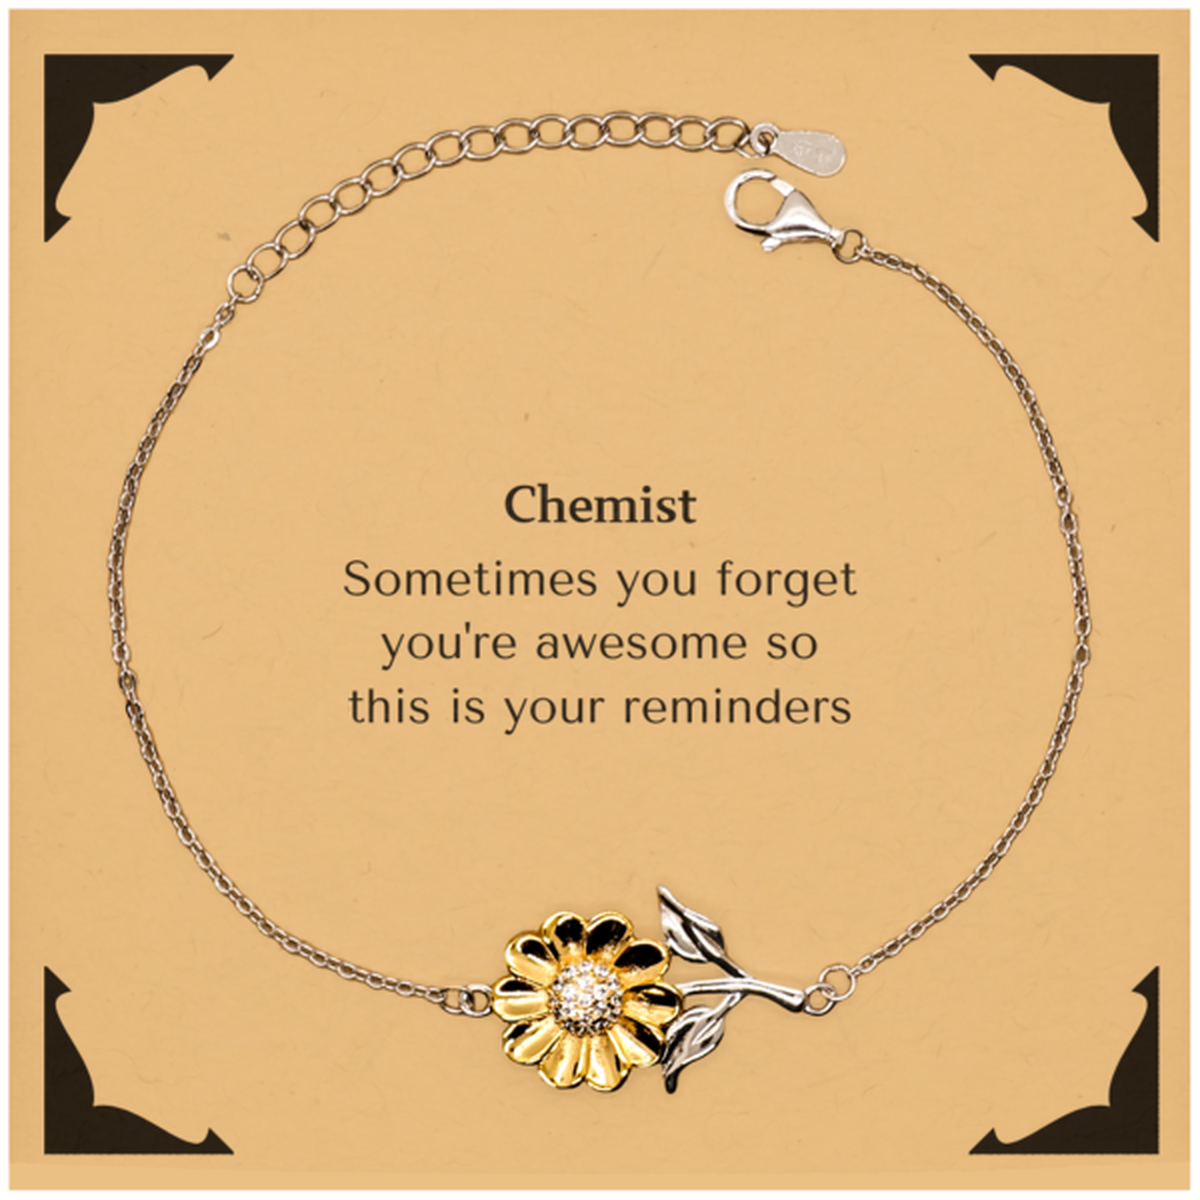 Sentimental Chemist Sunflower Bracelet, Chemist Sometimes you forget you're awesome so this is your reminders, Graduation Christmas Birthday Gifts for Chemist, Men, Women, Coworkers